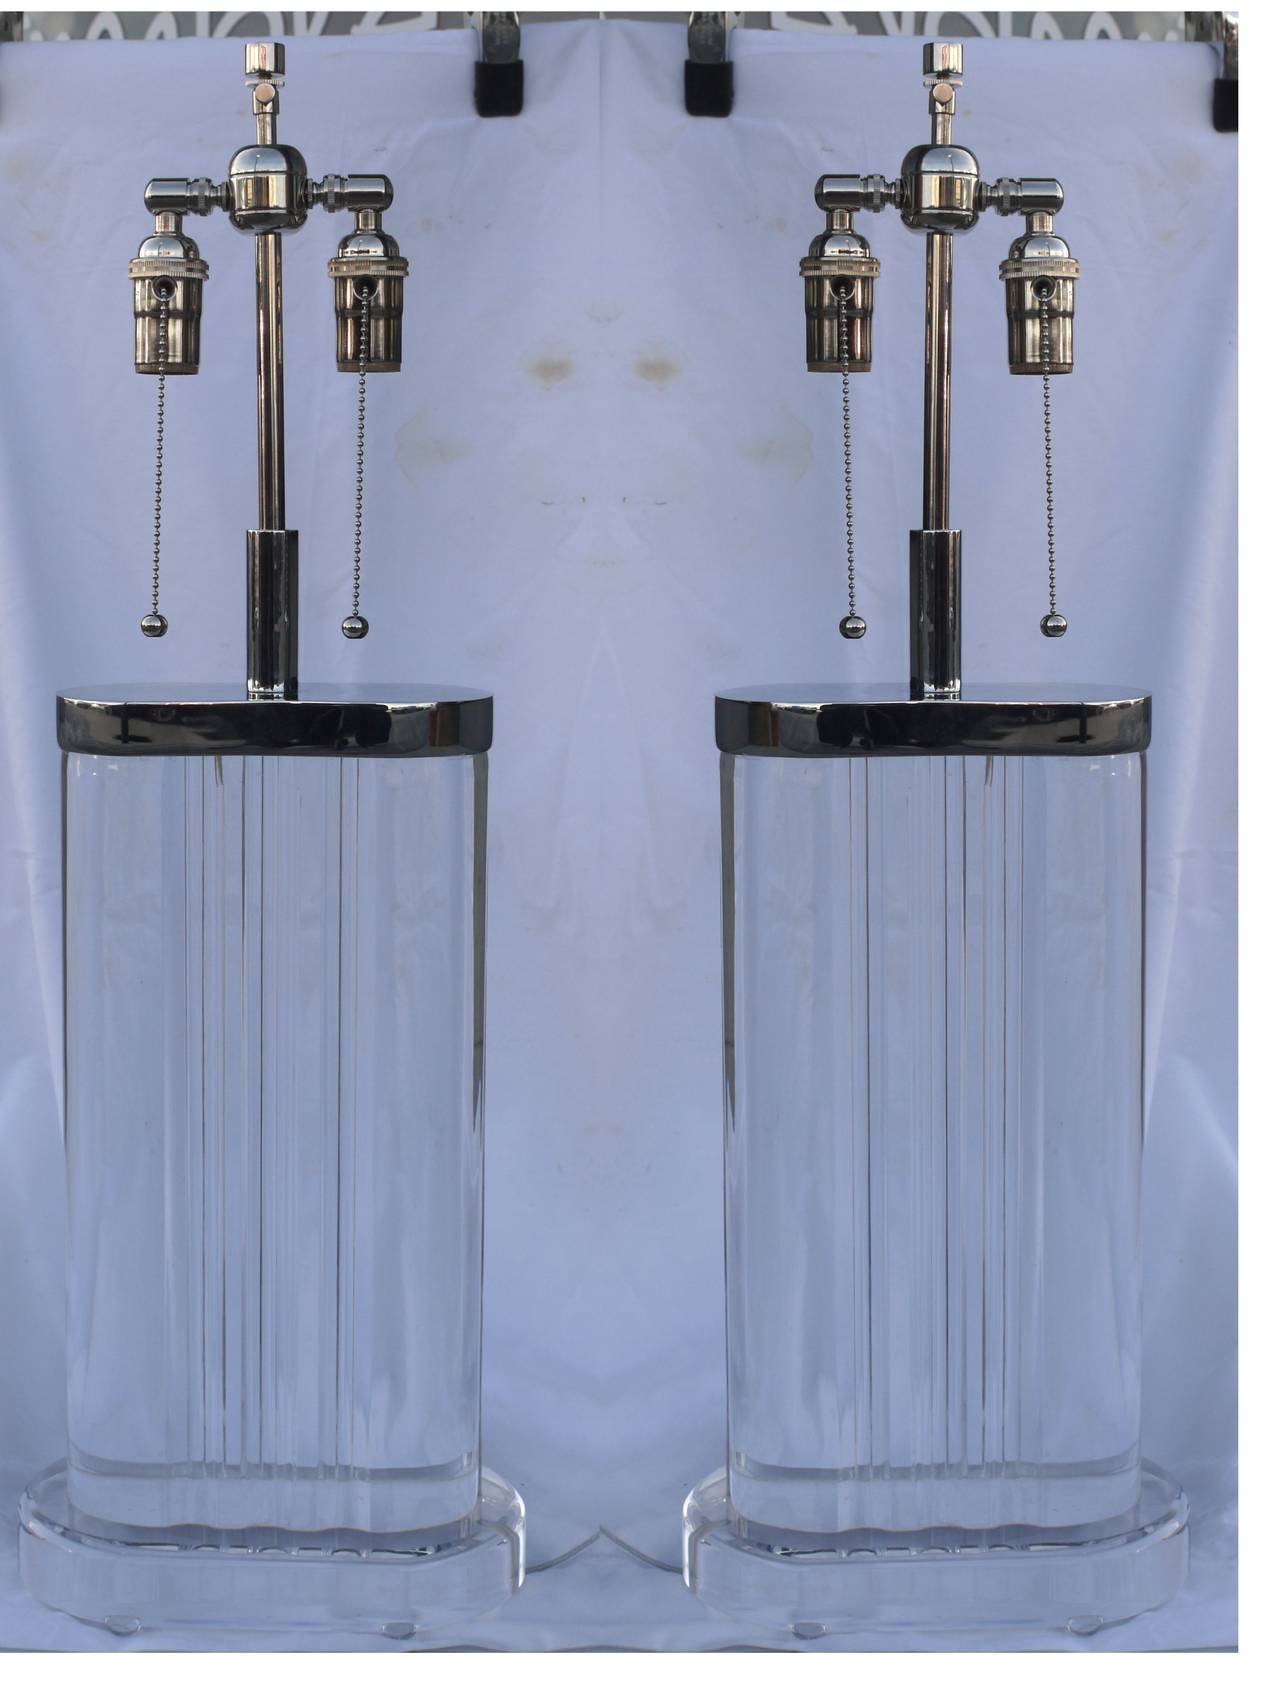 Chunky pair of optical Karl Springer style lamps with polished nickel hardware.